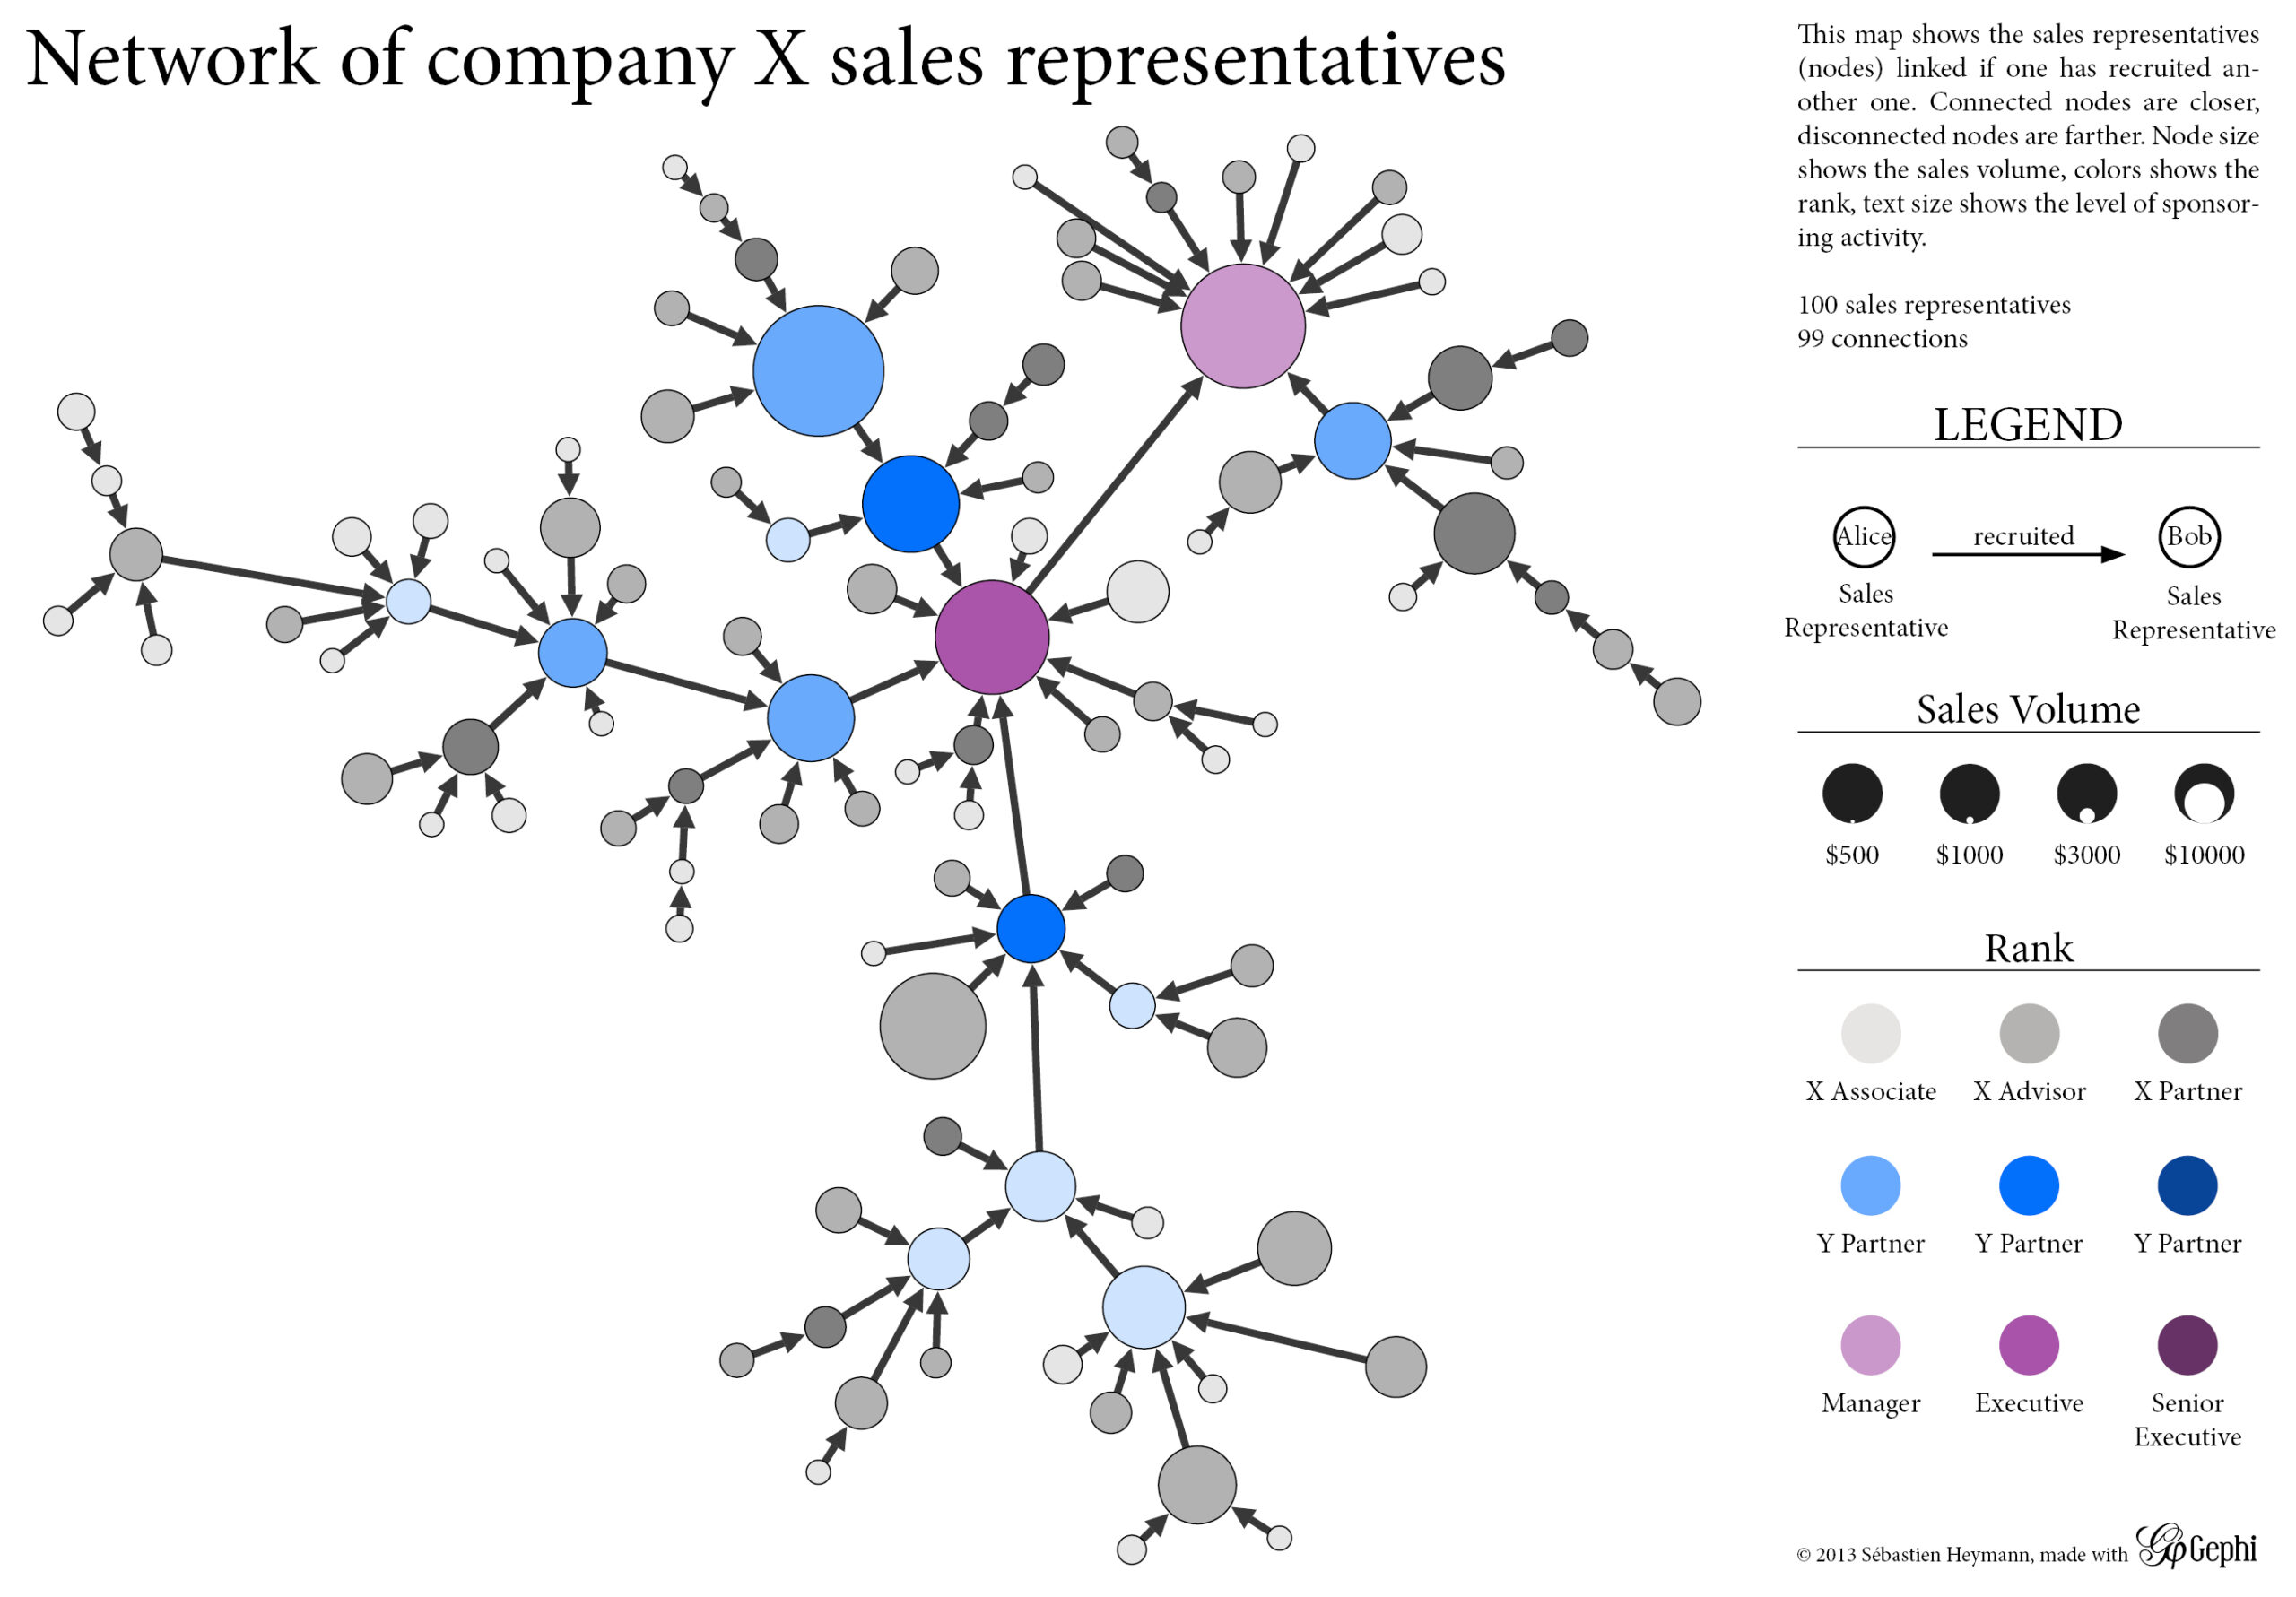 Visualization of a graph sample representing which sales representative was recruited by one another in a company. Dot size corresponds to sales volume during the year. Dot color corresponds to the rank in the company. (Private work from Heymann 2013).